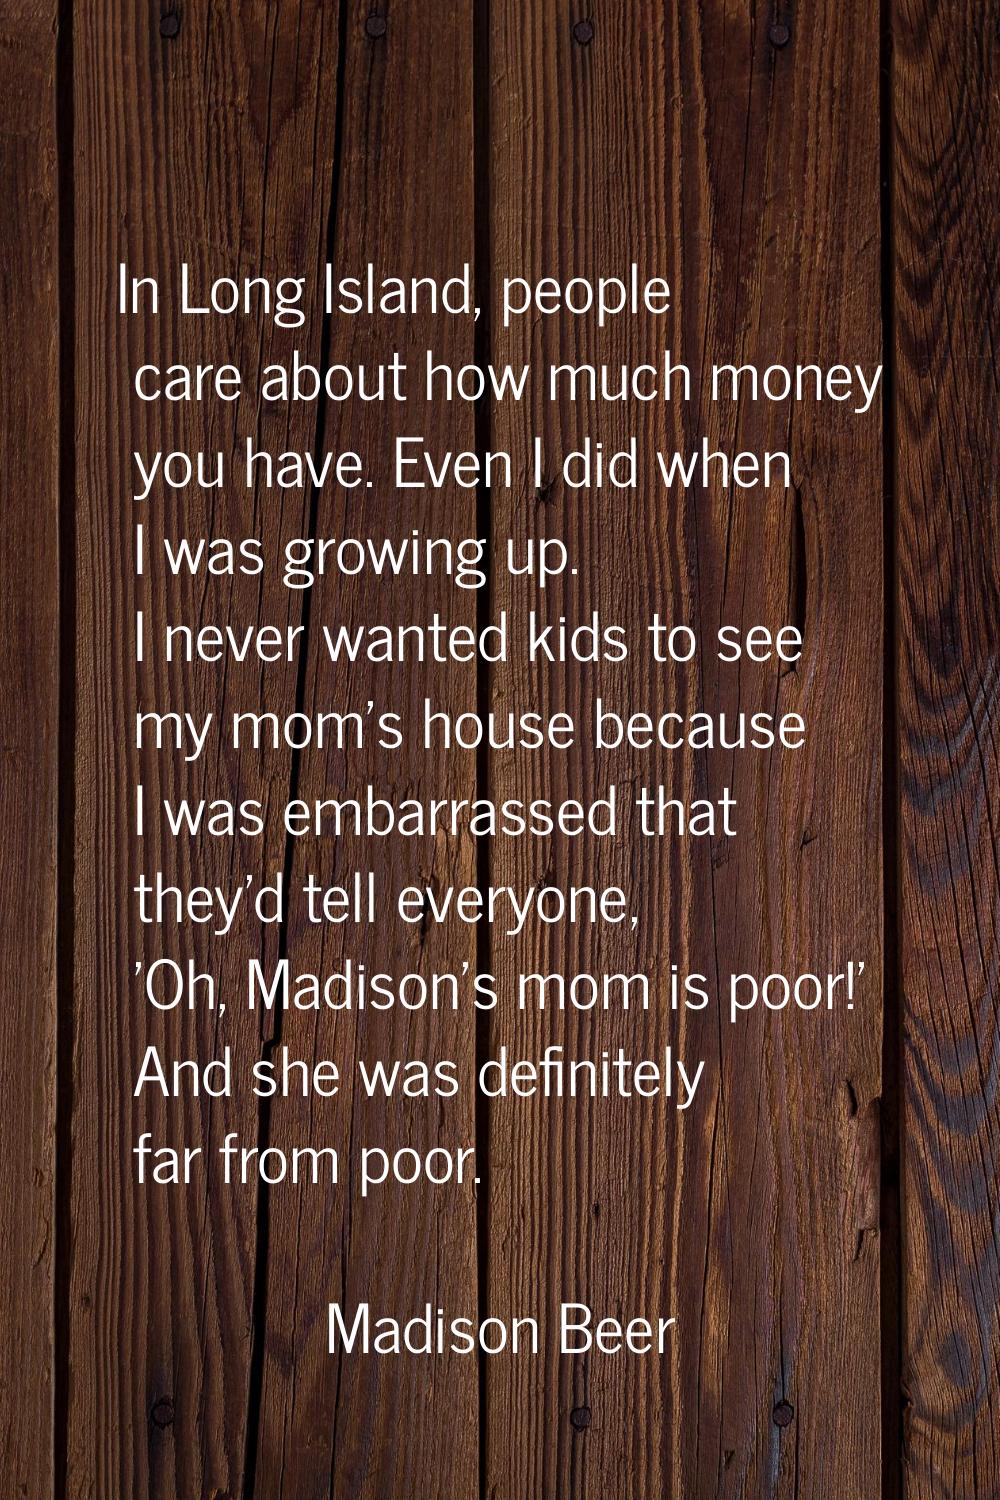 In Long Island, people care about how much money you have. Even I did when I was growing up. I neve